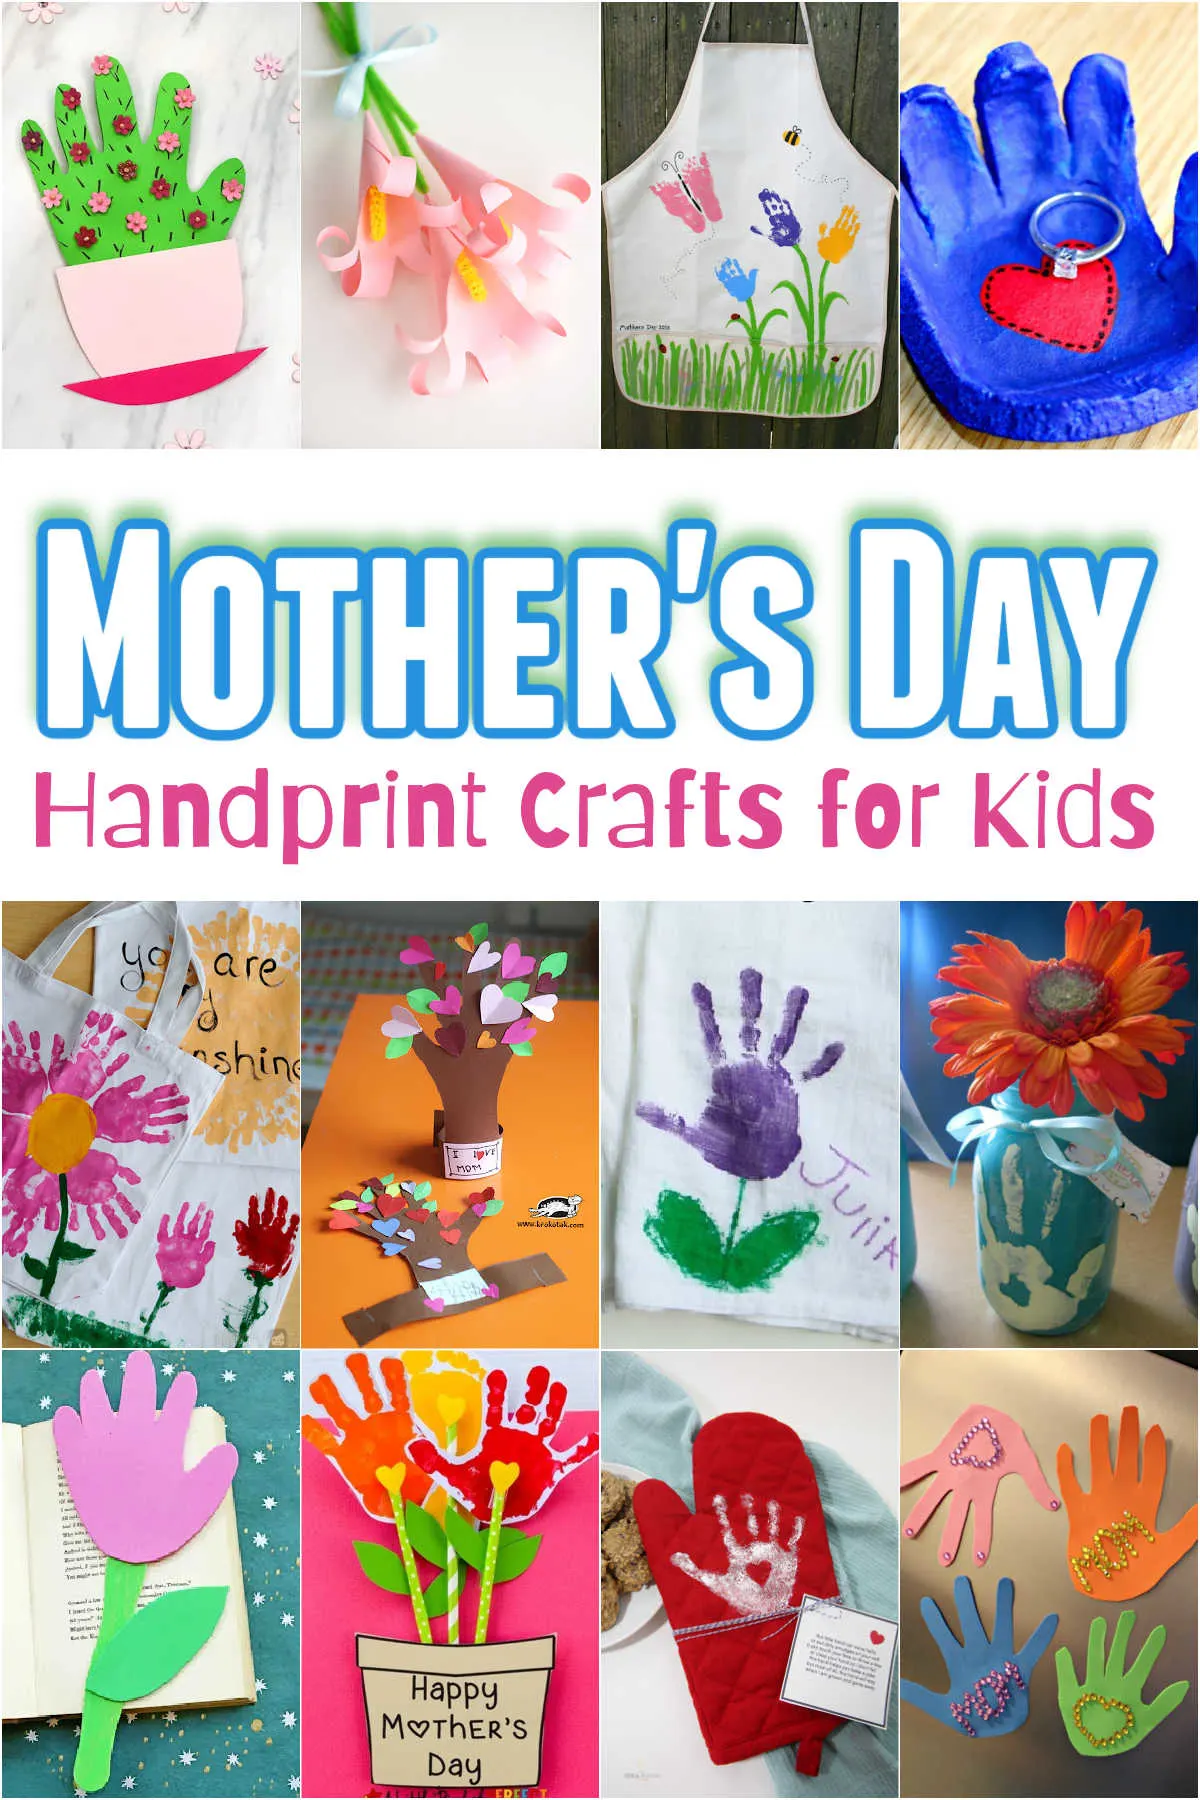 Collage of Handprint Mother's Day Crafts for Kids to Make